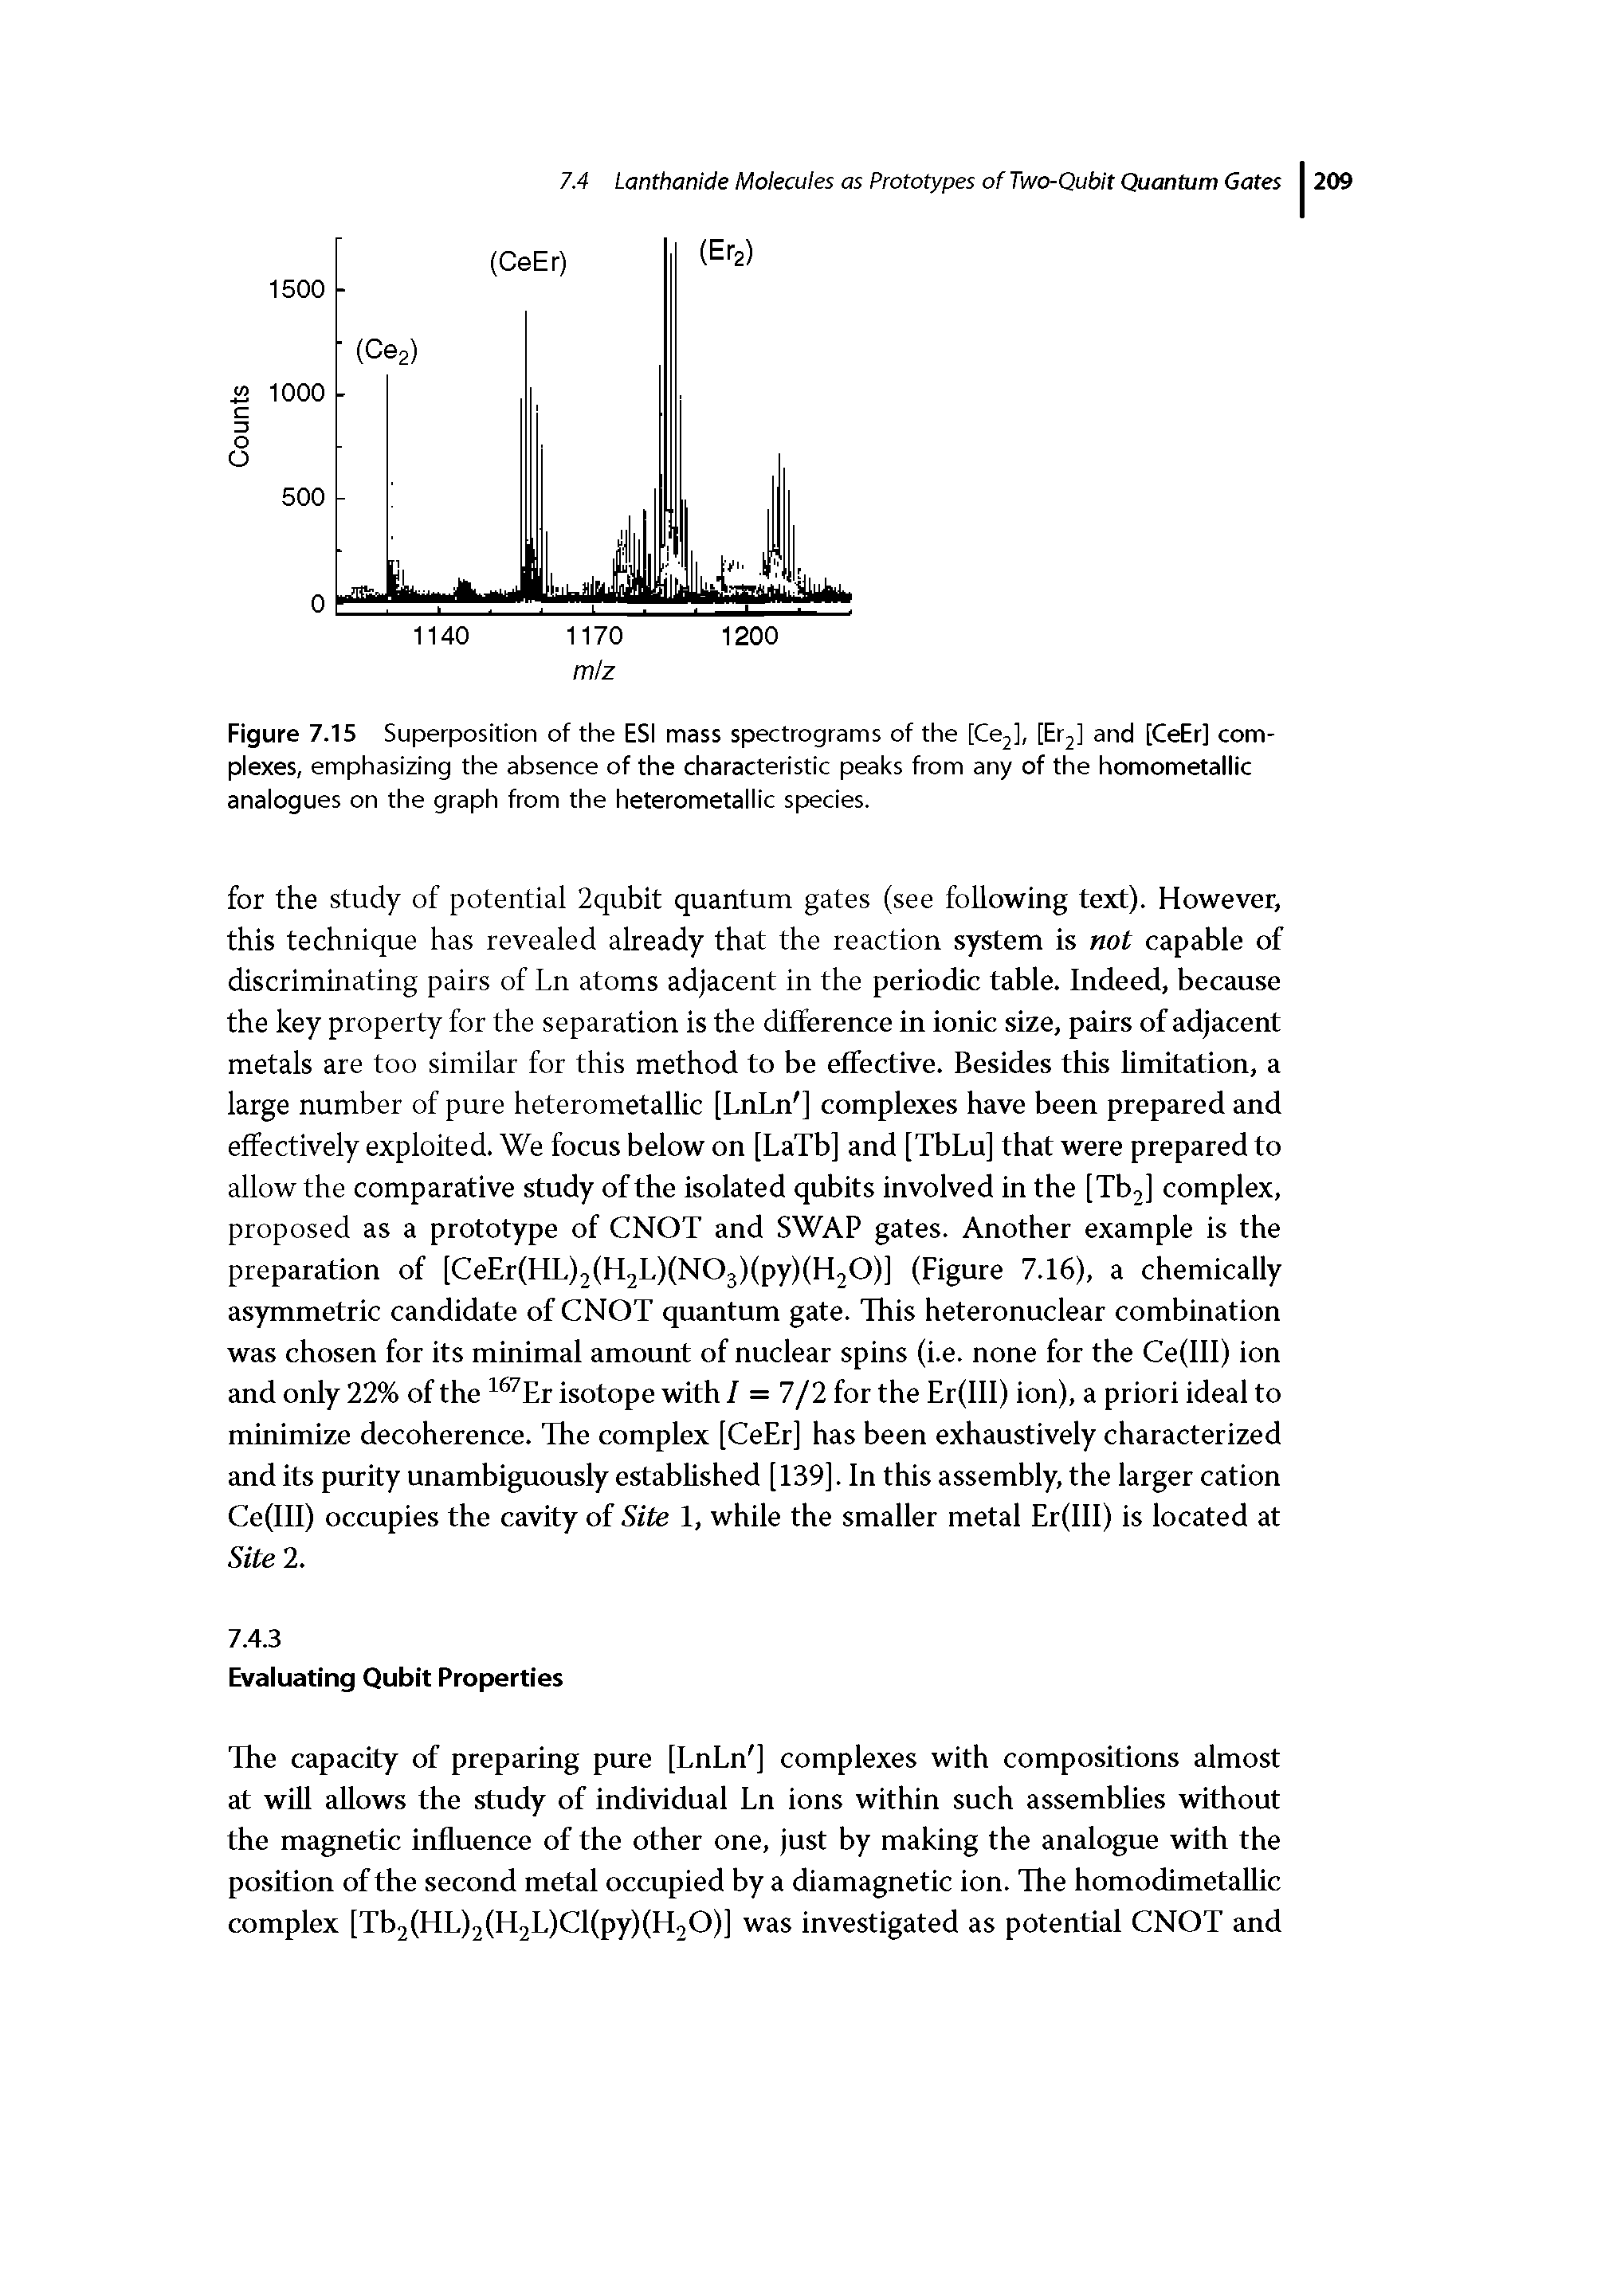 Figure 7.15 Superposition of the ESI mass spectrograms of the [Ce2], [Er2] and [CeEr] complexes, emphasizing the absence of the characteristic peaks from any of the homometallic analogues on the graph from the heterometallic species.